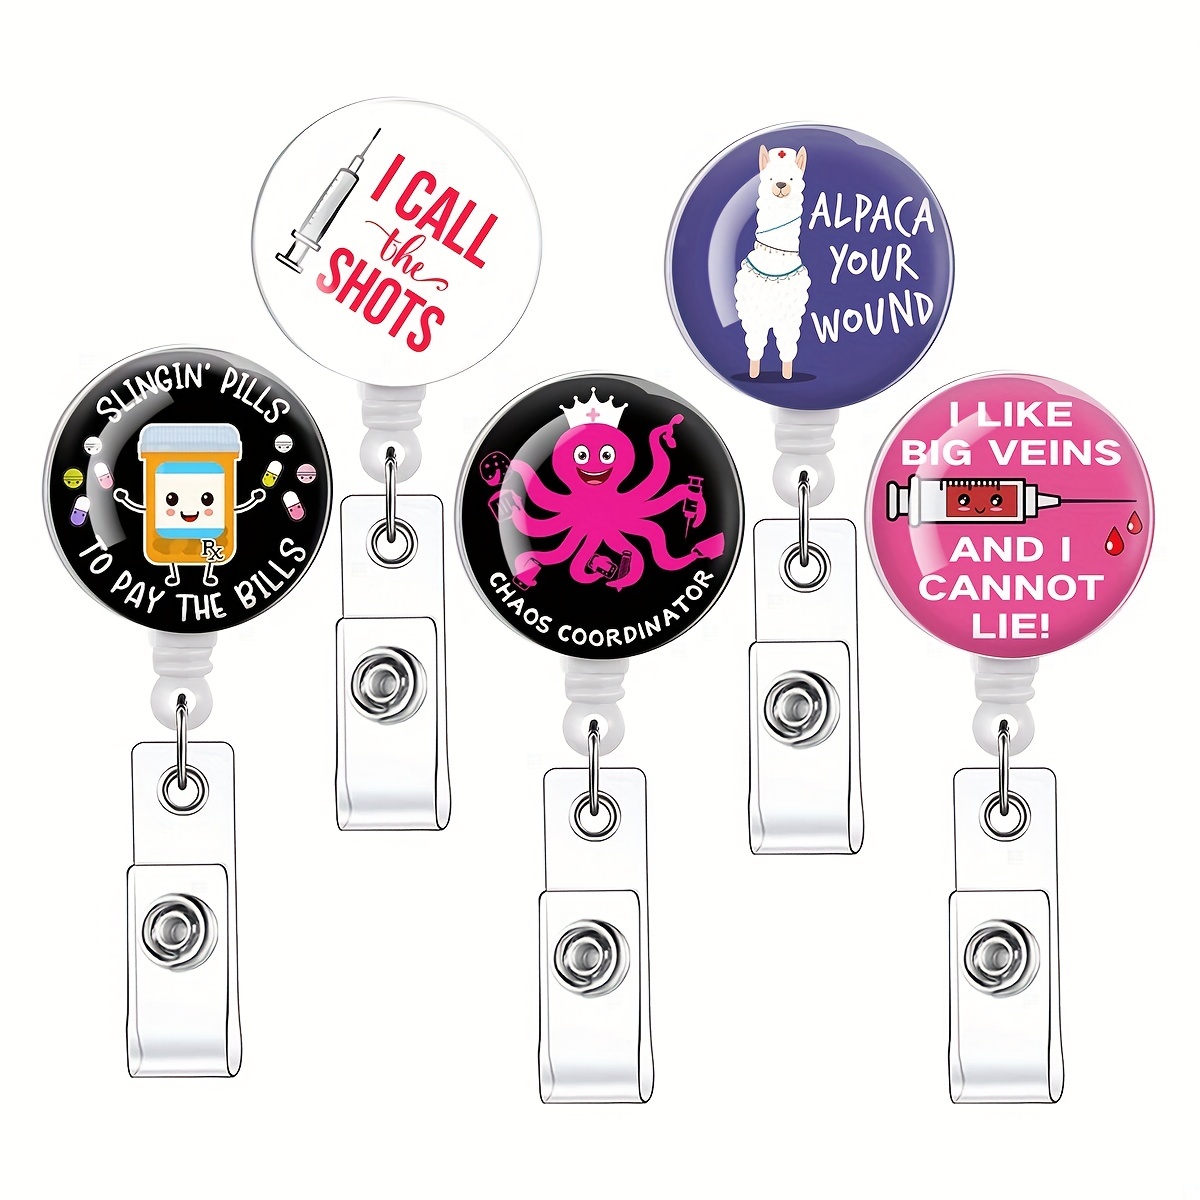 Funny Badge Reel Retractable, Funny Gift for Coworker, Christmas Gift for  Nurse, Nurse Gifts for Graduation, Interchangeable Badge Reel 